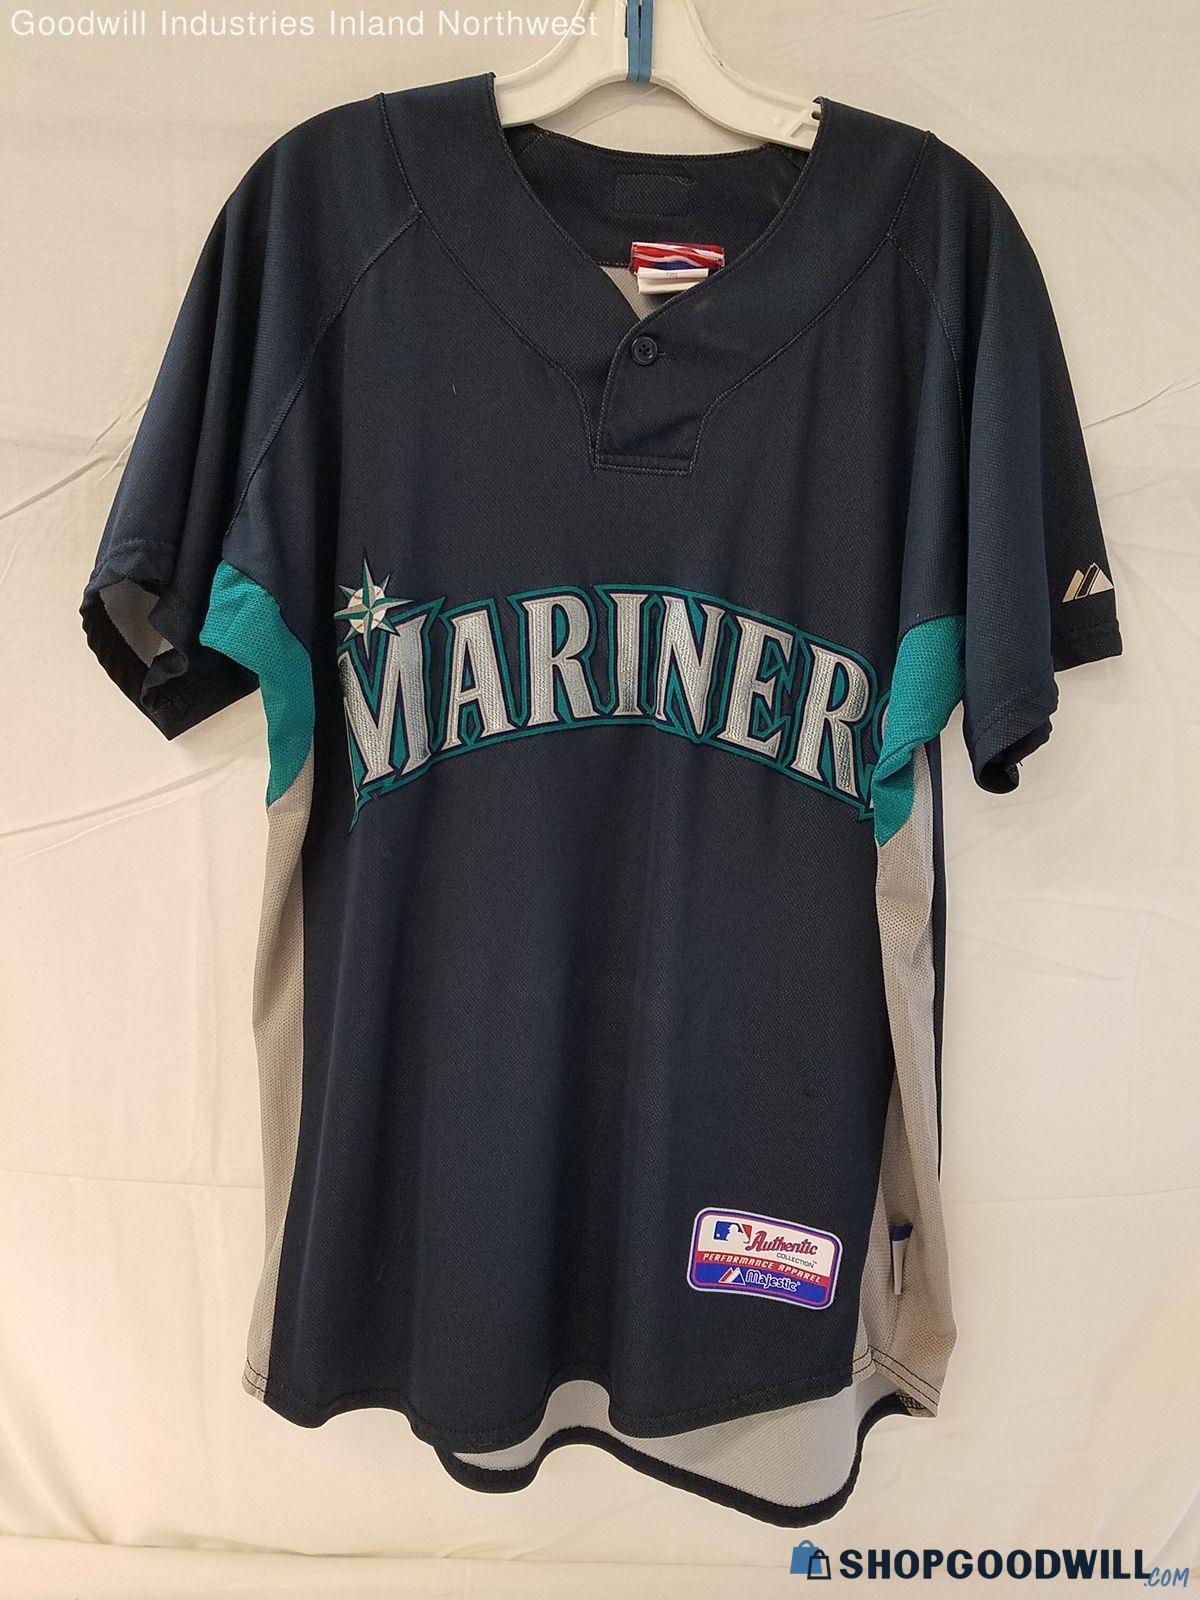 Men's Mariners Navy & Teal Athletic Jersey Top Size M - shopgoodwill.com